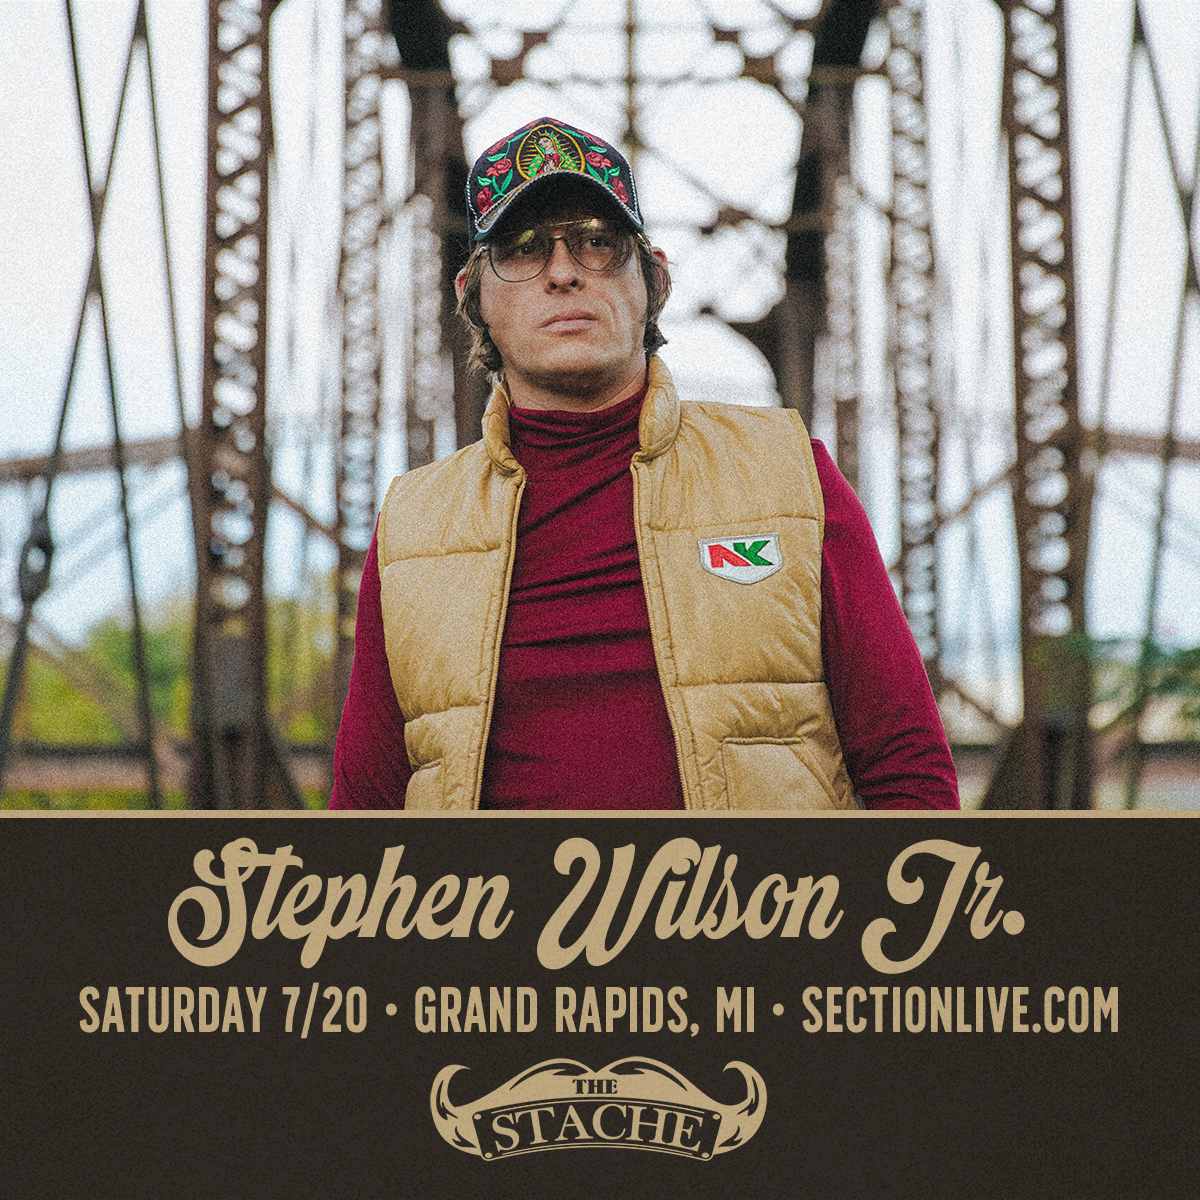 Grand Rapids, MI - im headed your way for @sectionlive Saturday, July 20. tickets go øn sale this Friday, May 10 at 10a. you can sign up for email updates at stephenwilsonjr.com to get a presale code. lets rage 👽🤘🏻 tickets on sale 5/10 @ 10a: etix.com/ticket/p/98089…